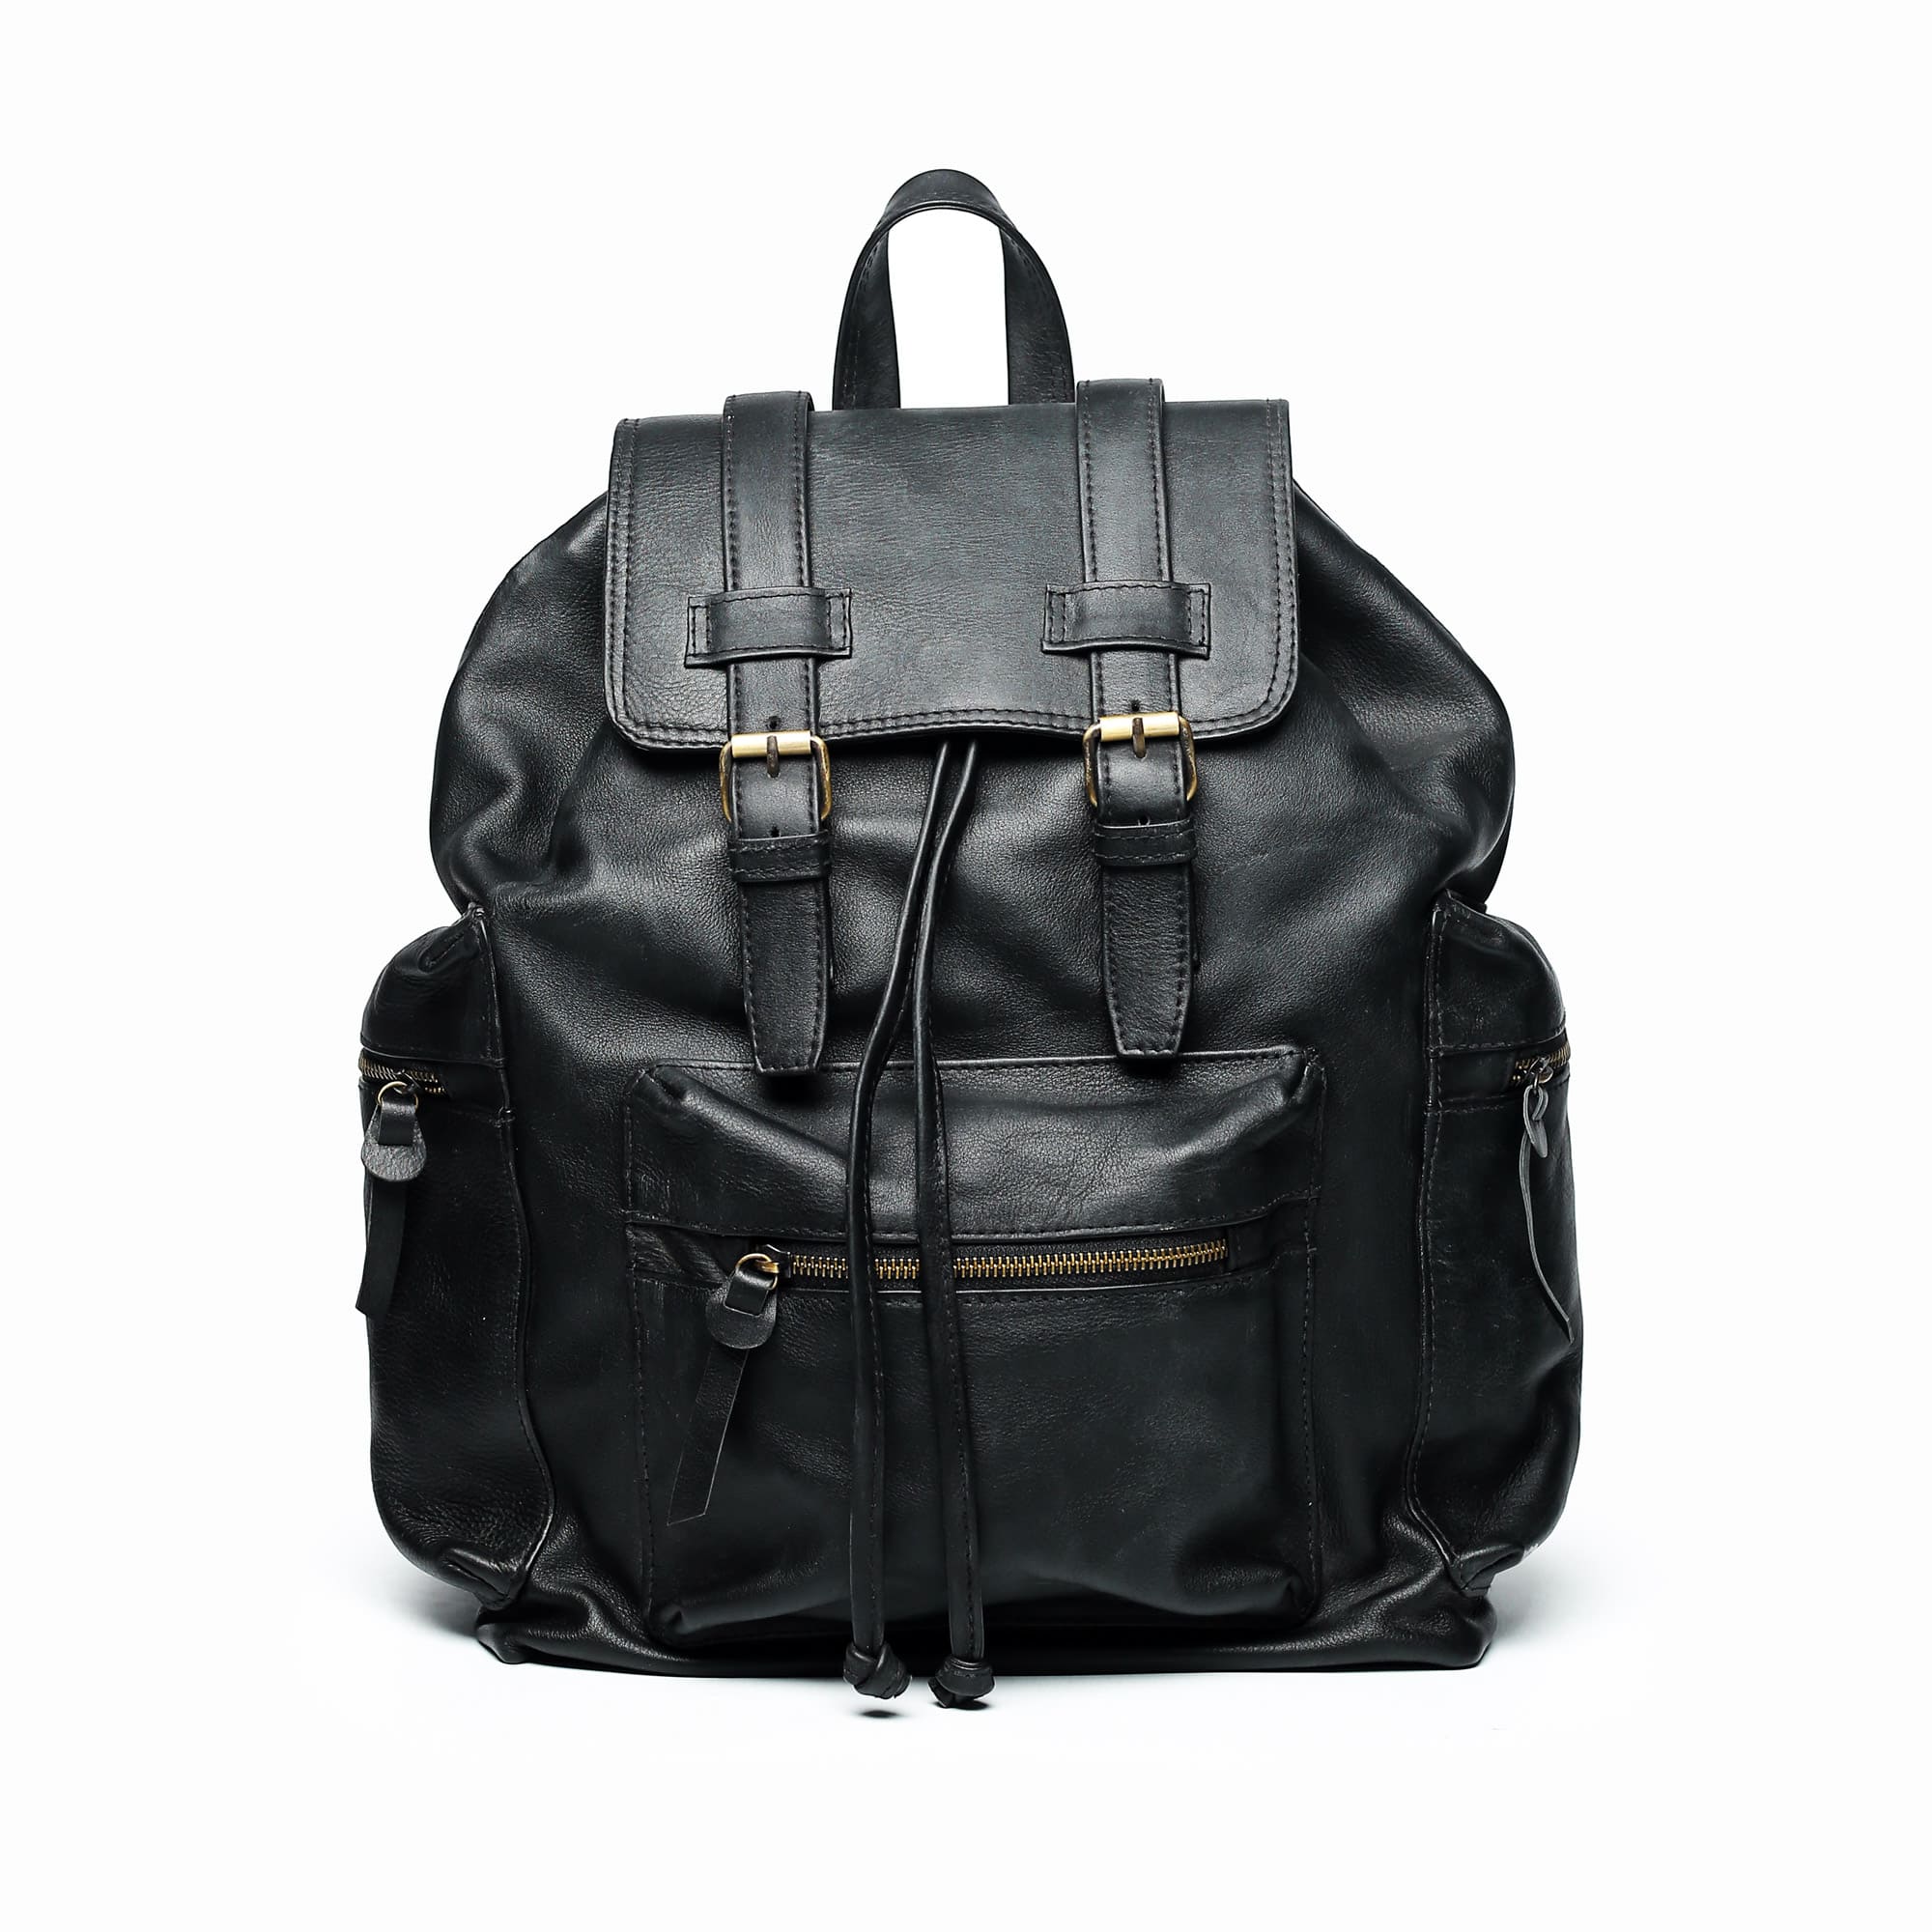 Leather Backpack in Pakistan: Traveling Bags, College TrendyBags